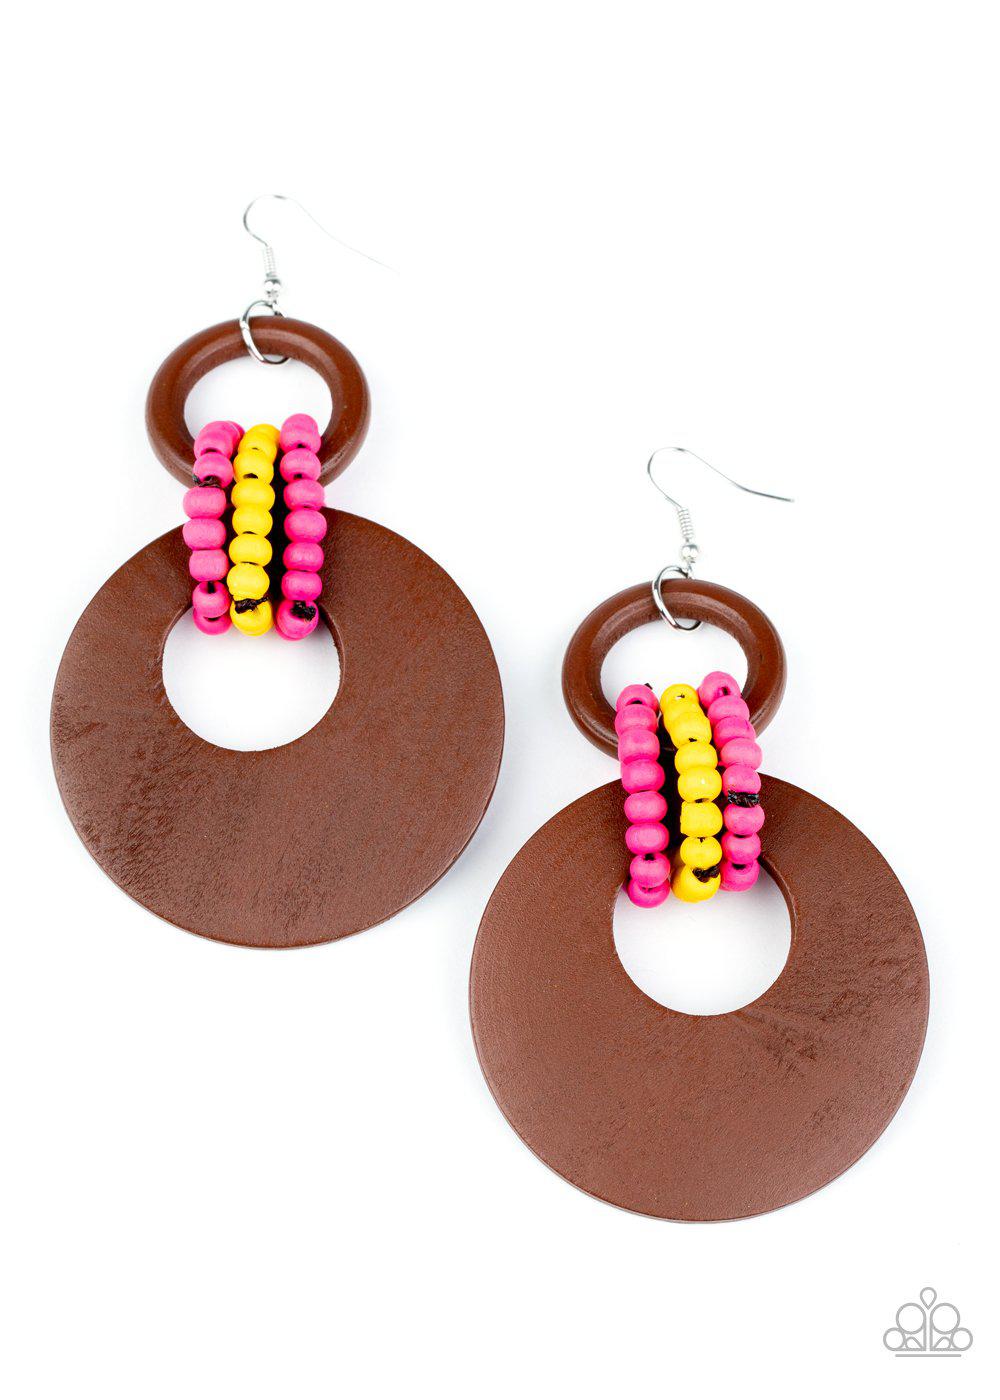 Beach Day Drama Multi - Pink, Yellow and Brown Wood Earrings - Paparazzi Accessories - lightbox -CarasShop.com - $5 Jewelry by Cara Jewels